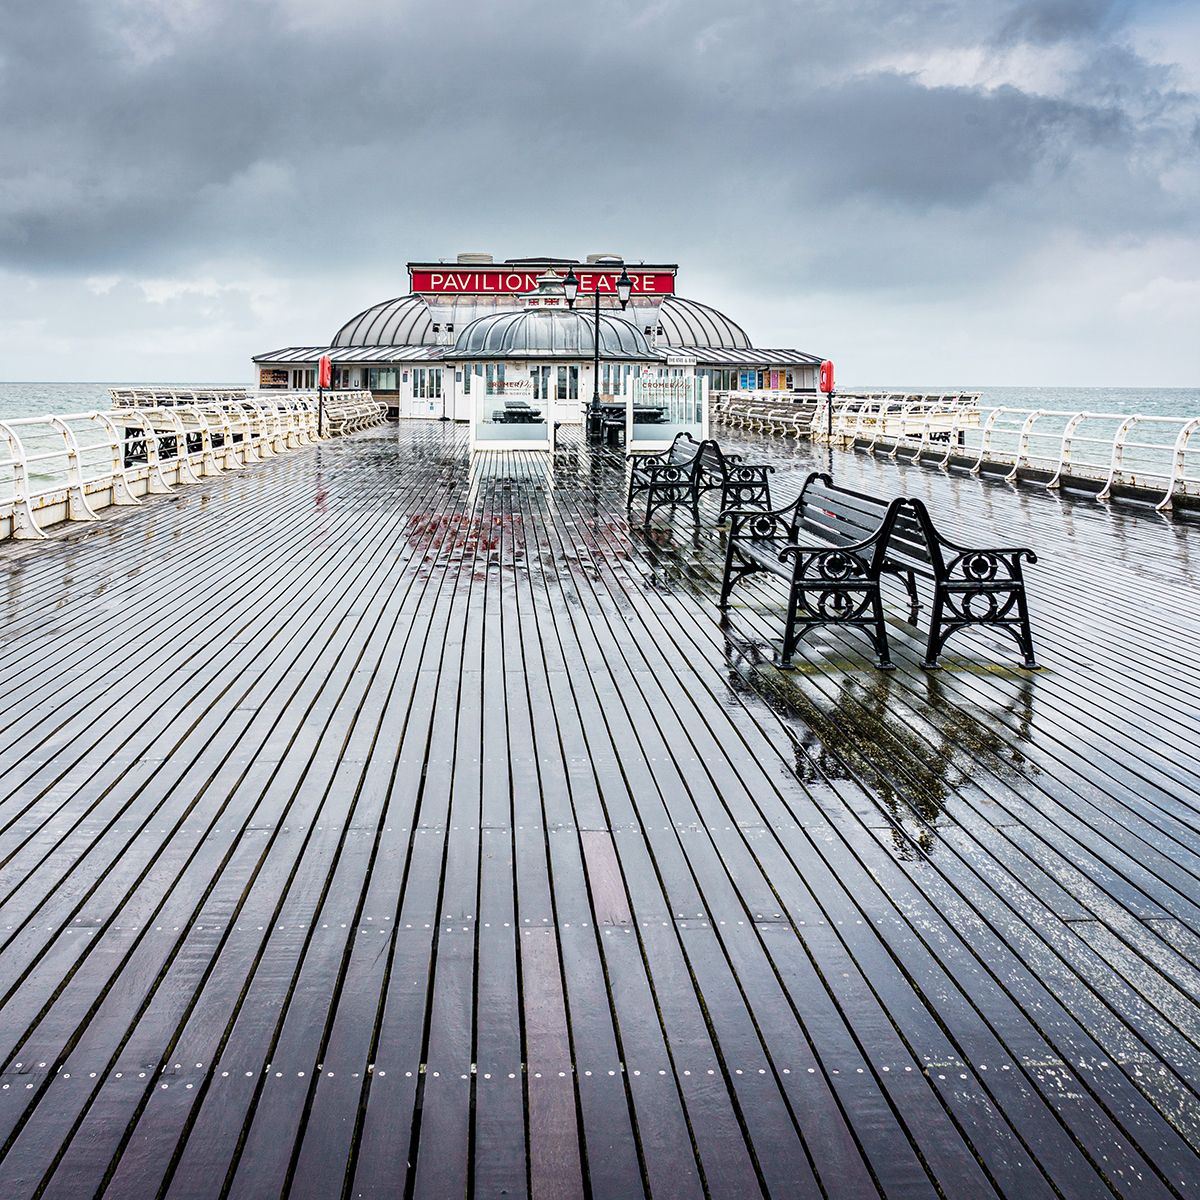 OUT OF SEASON PIER by Malcolm Nabarro